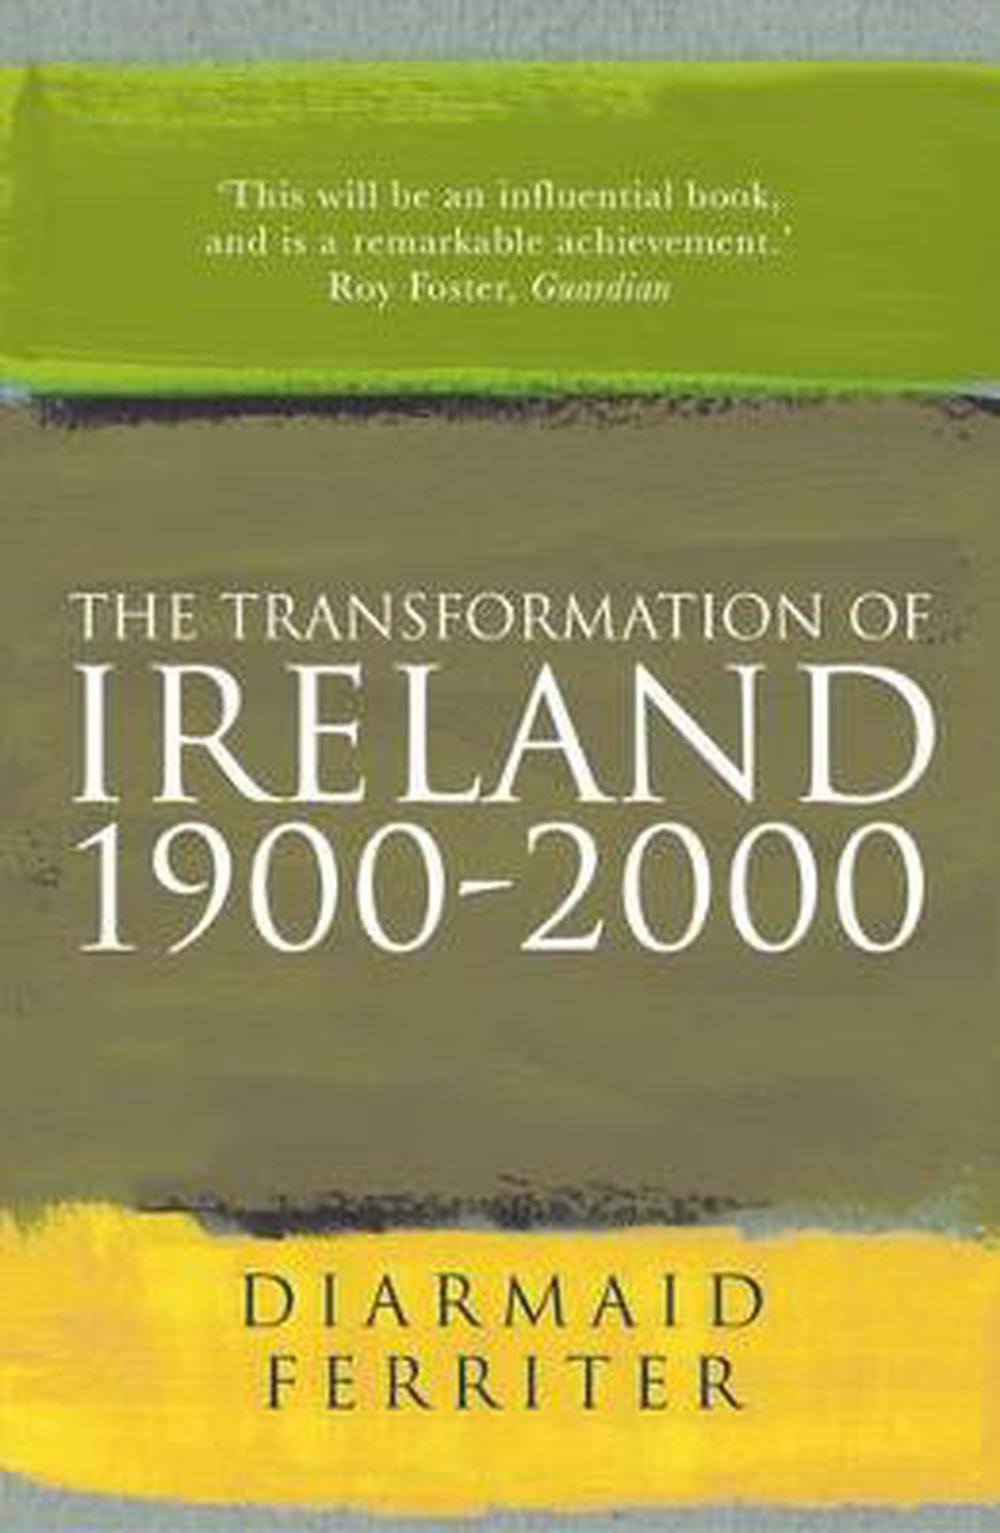 The Transformation of Ireland, 1900-2000 [Book]